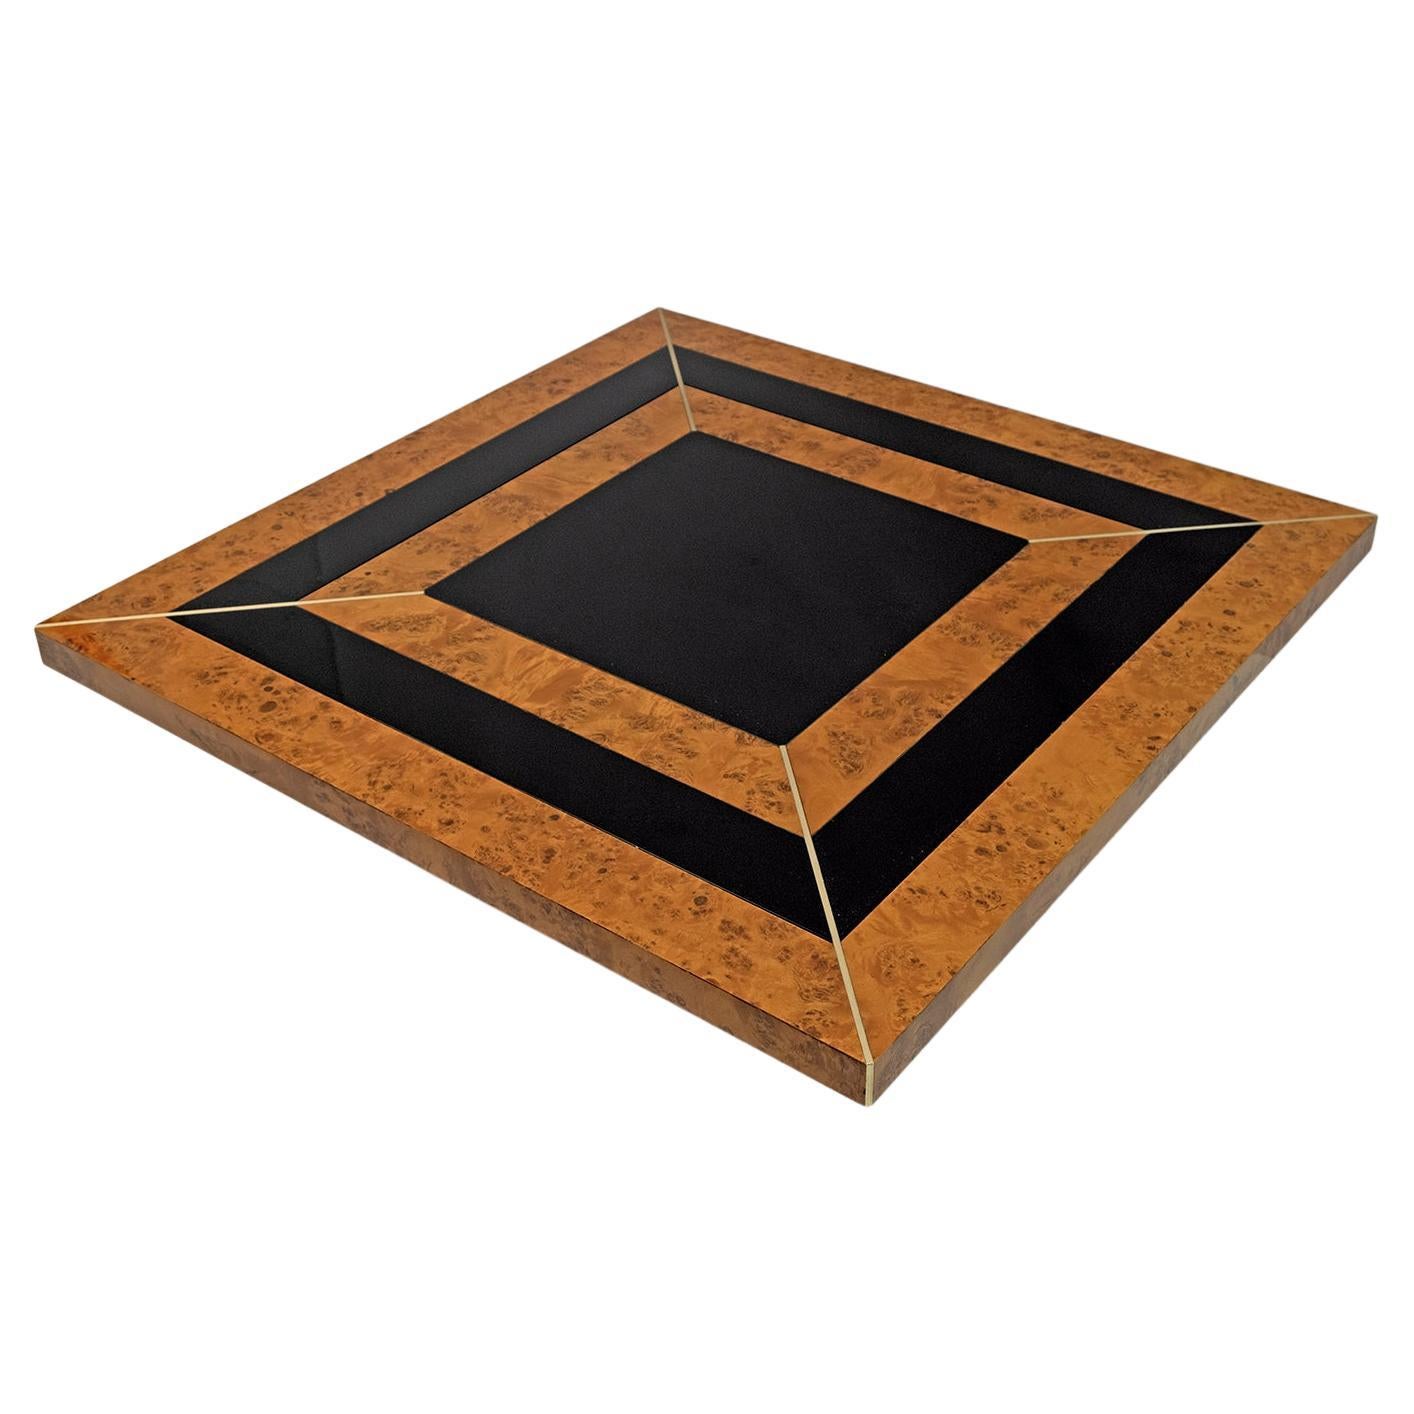 Brass Art Déco Style Italian Walnut and Lacquer Coffee Table, 1970s For Sale